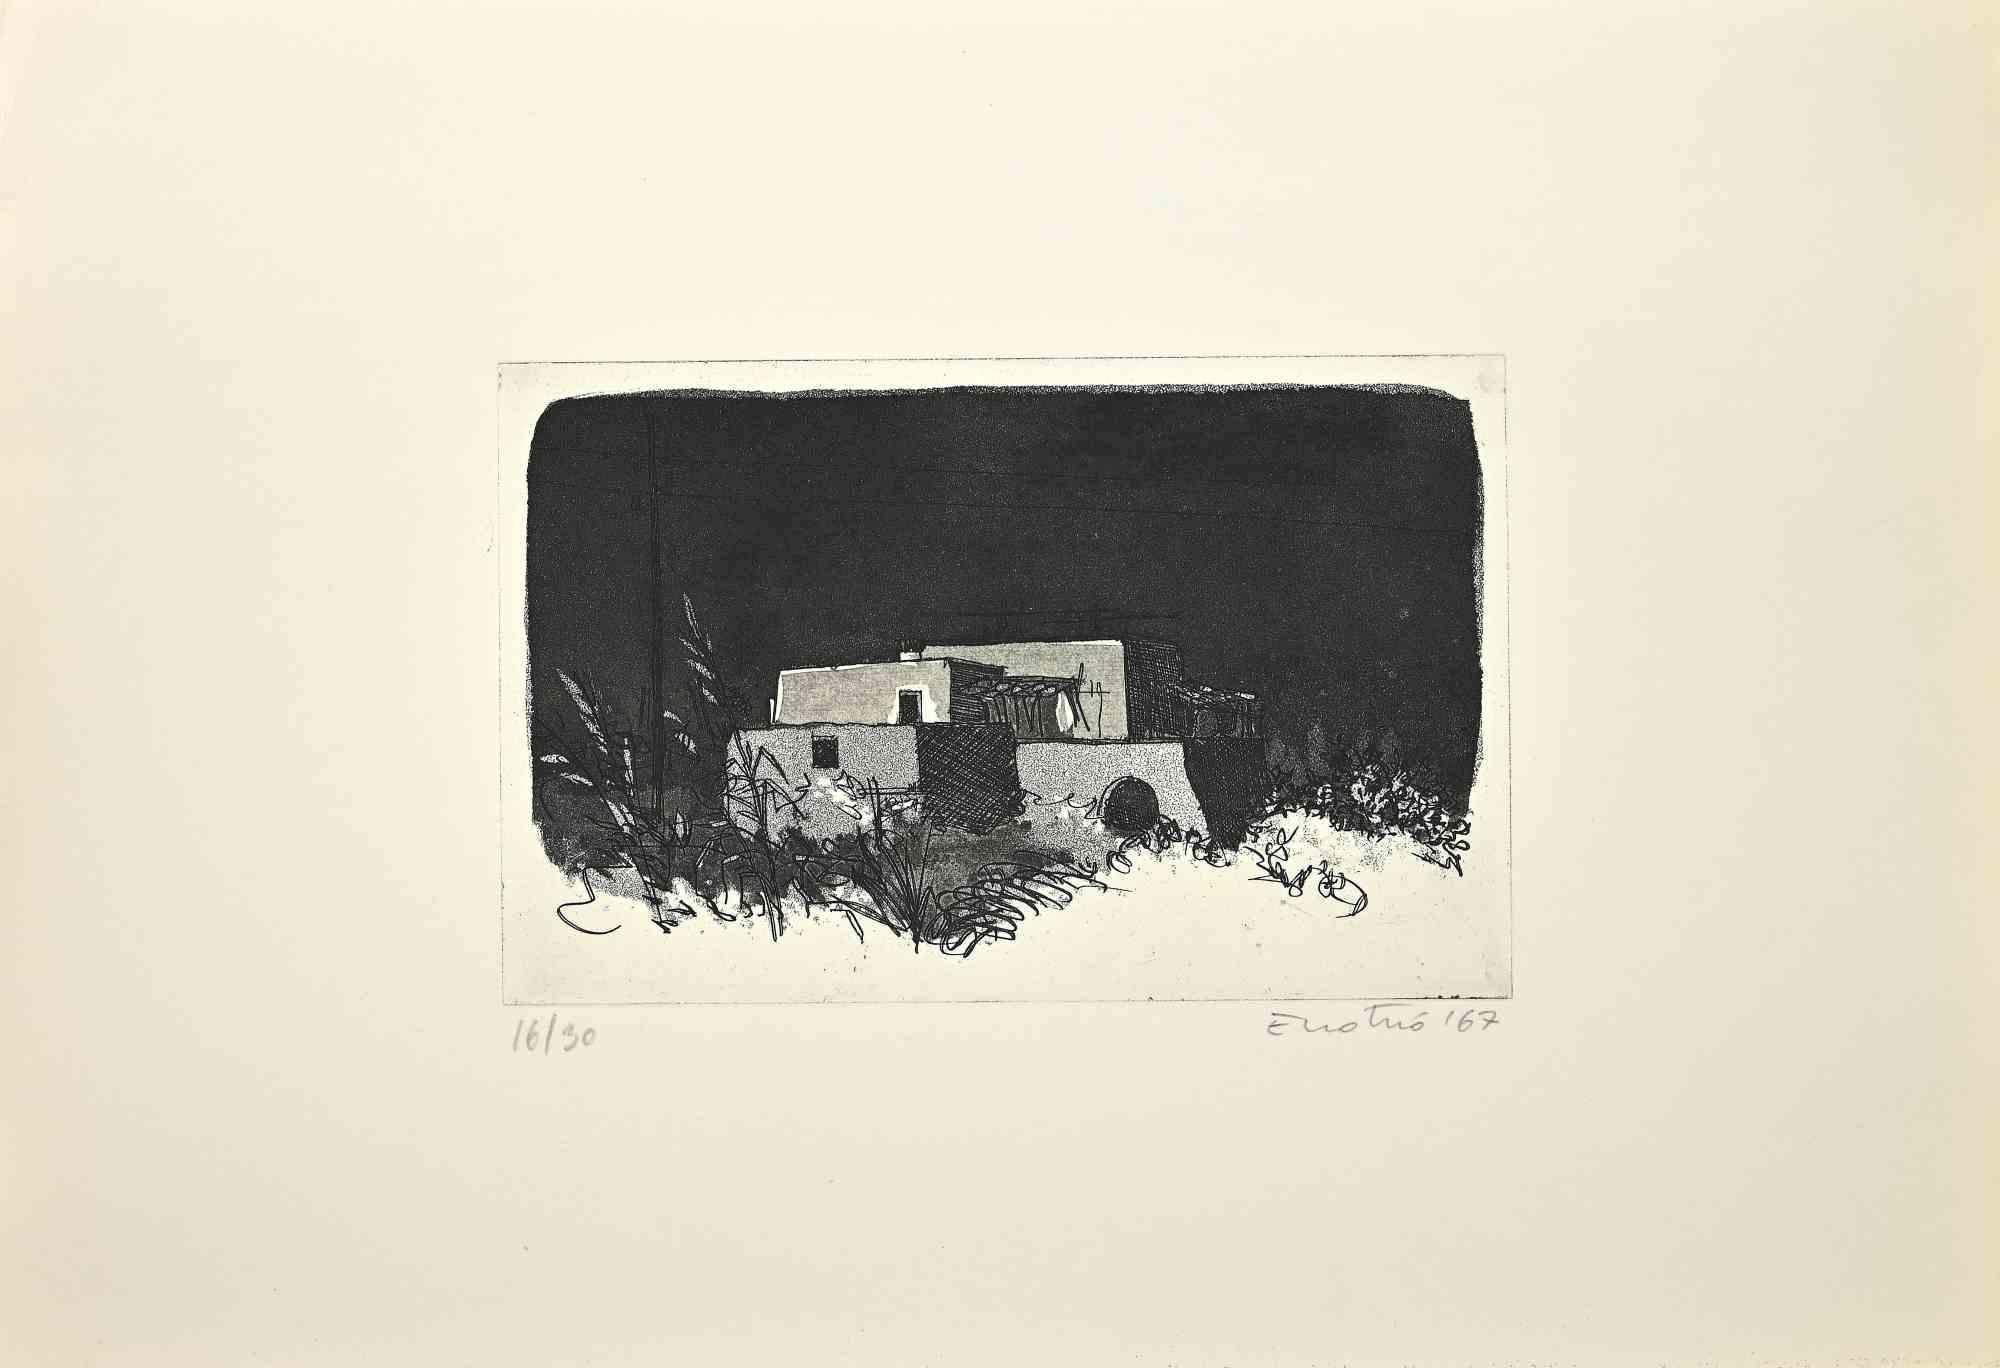 Landscape is an Etching and Aquatint realized by Enotrio Pugliese in 1967.

Hand-signed by the artist on the lower.

Numbered, Limited edition of 30 prints.

Good conditions.

Enotrio Pugliese (May 11, 1920 - August 1989) was an Italian painter.